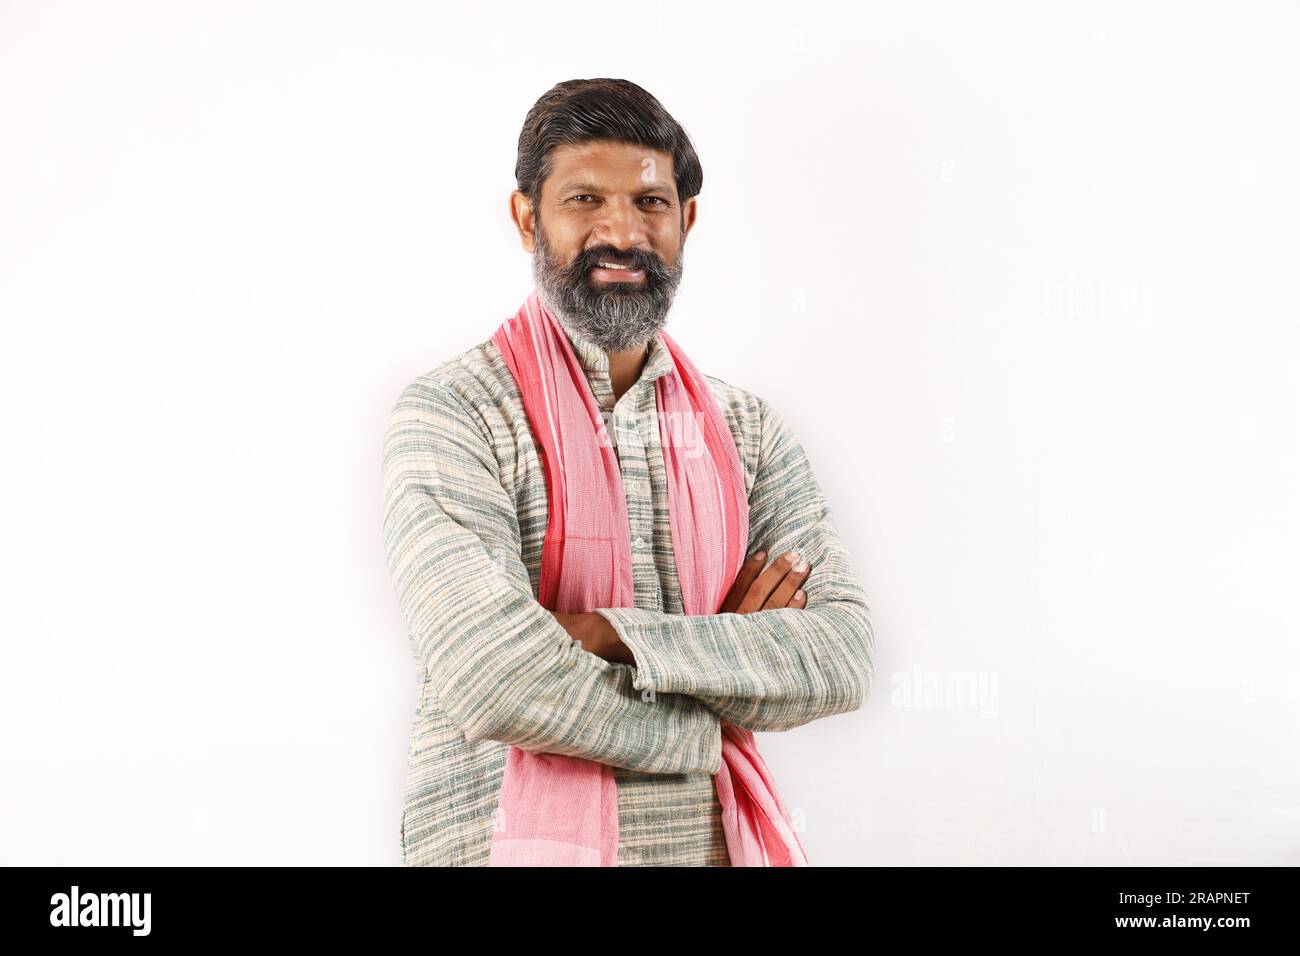 Portrait of Indian bearded man in rural India concept. Funky expressions white background. poor villager man. various expressions and moods of poverty Stock Photo